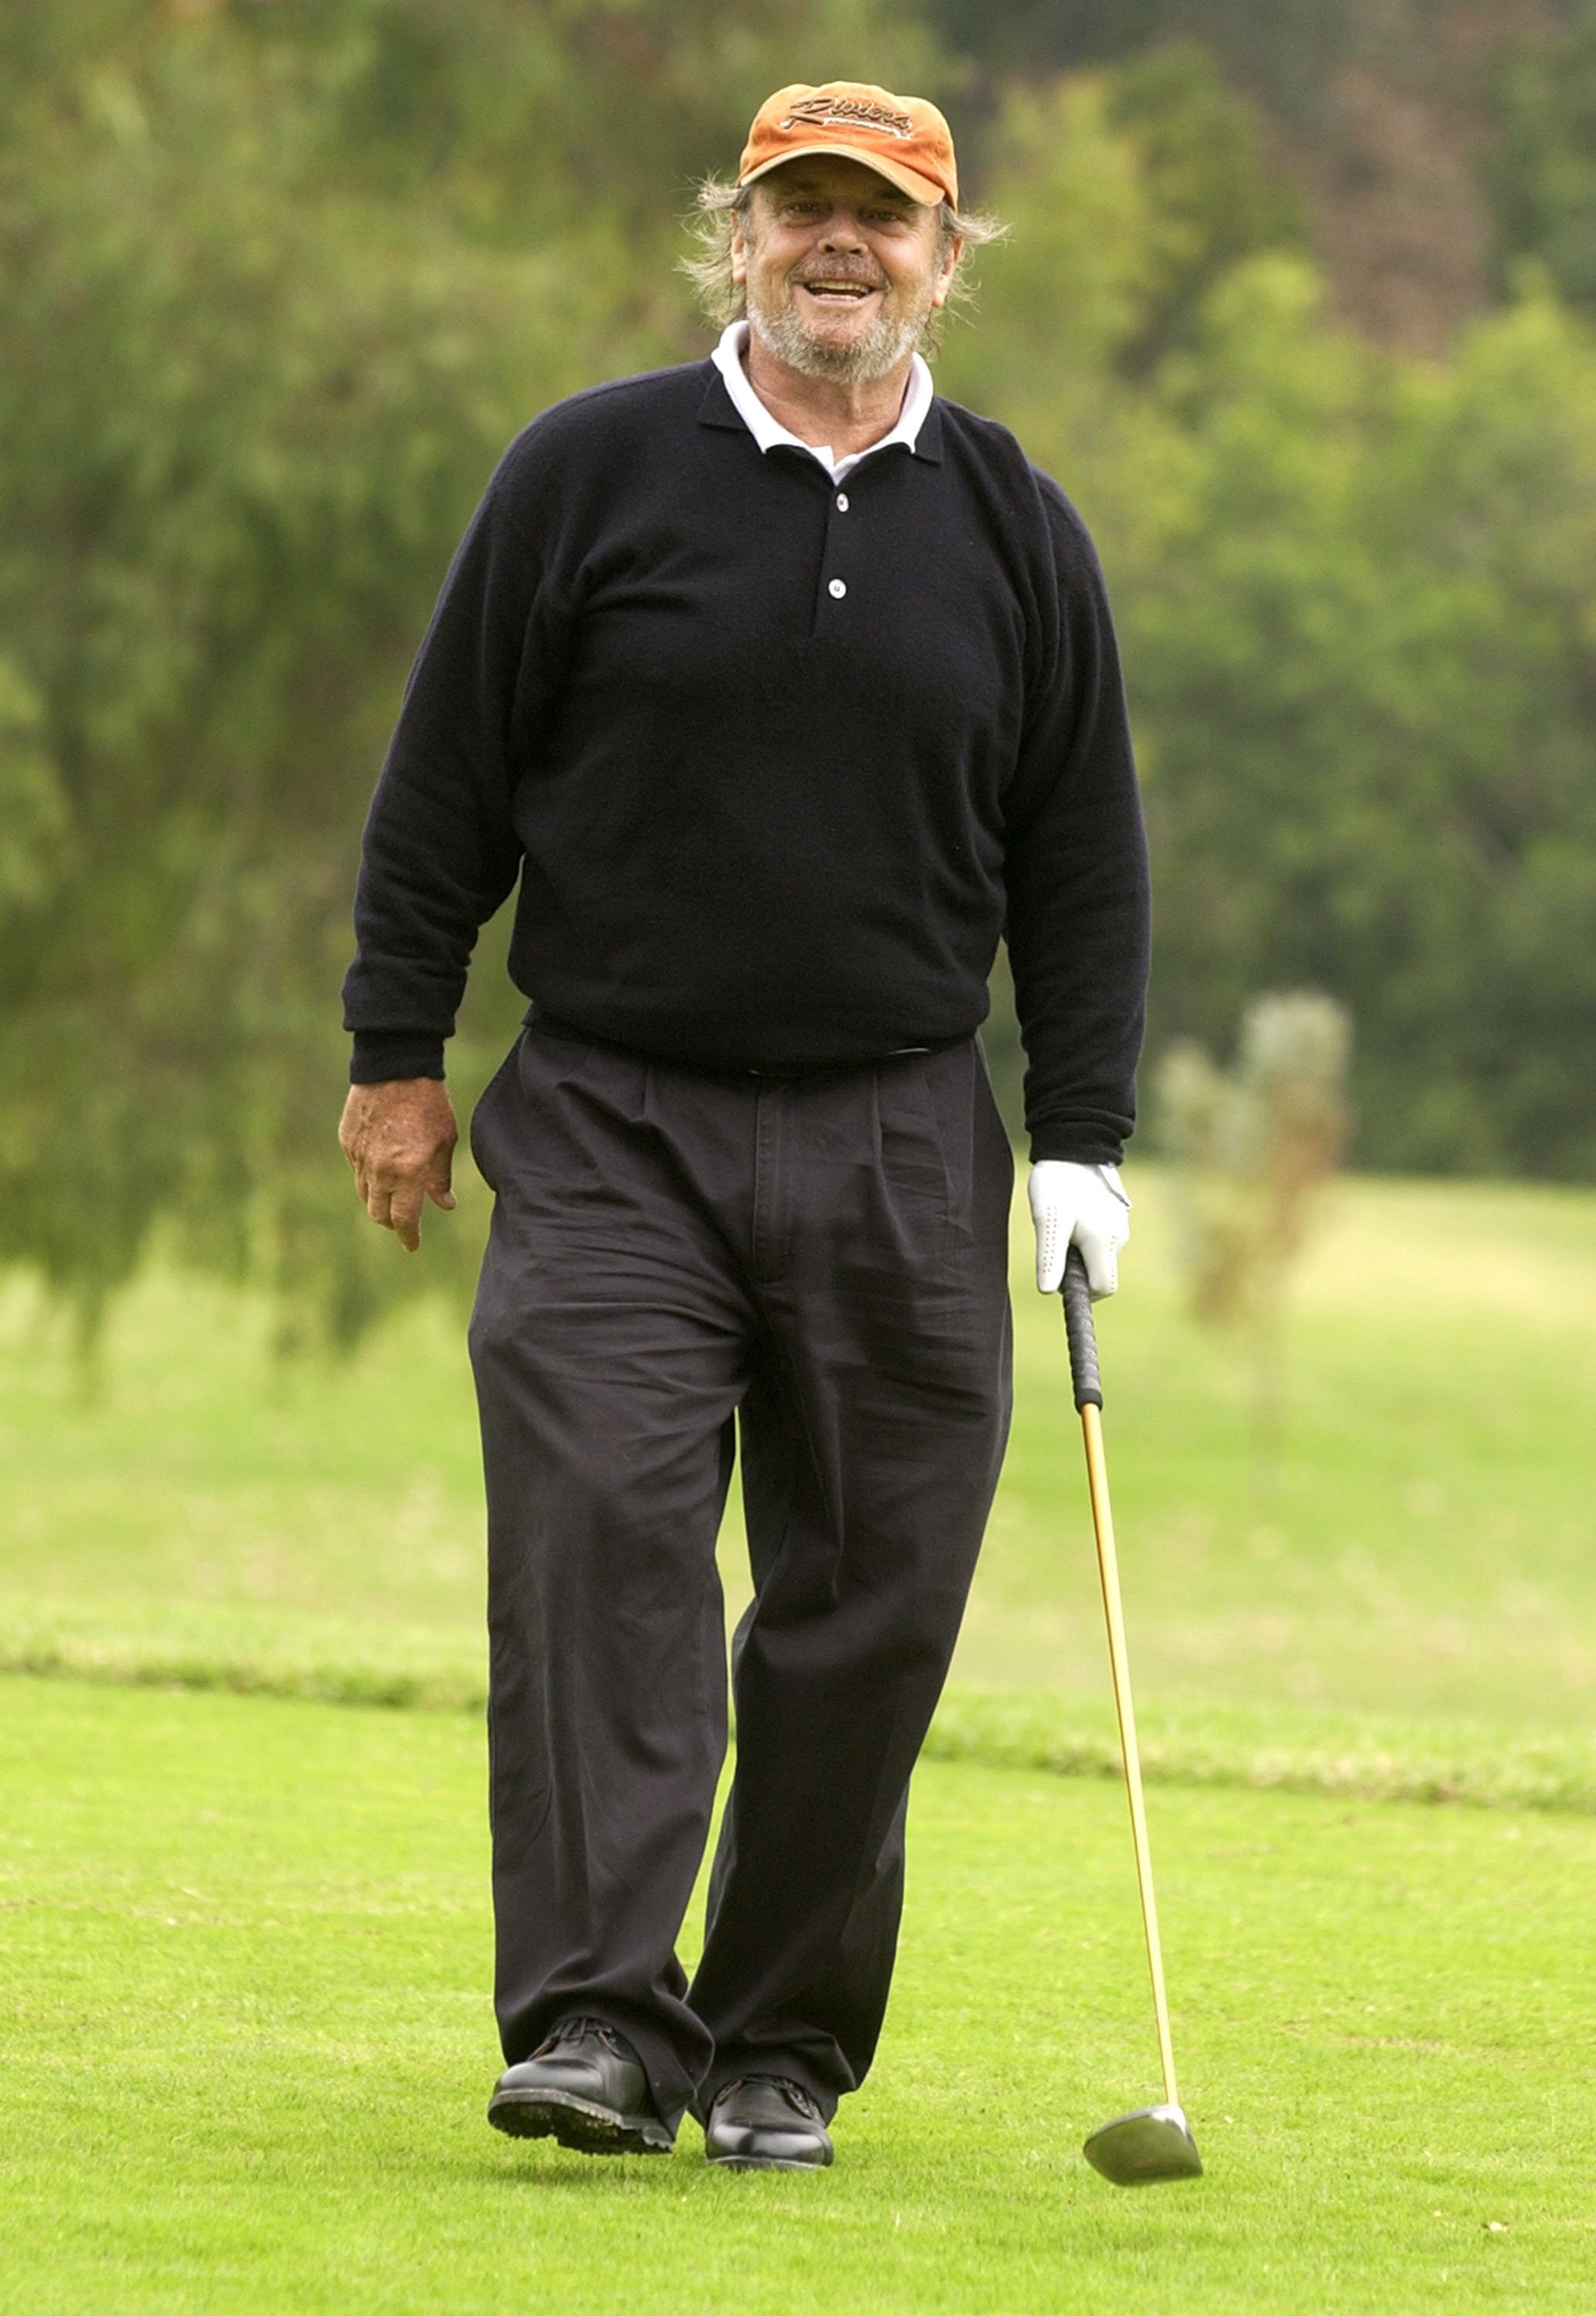 Jack Nicholson during 4th Annual Elizabeth Glaser Pediatric AIDS Foundation Celebrity Golf Classic on October 21, 2002 at Riviera Country Club in Pacific Palisades, California | Source: Getty Images